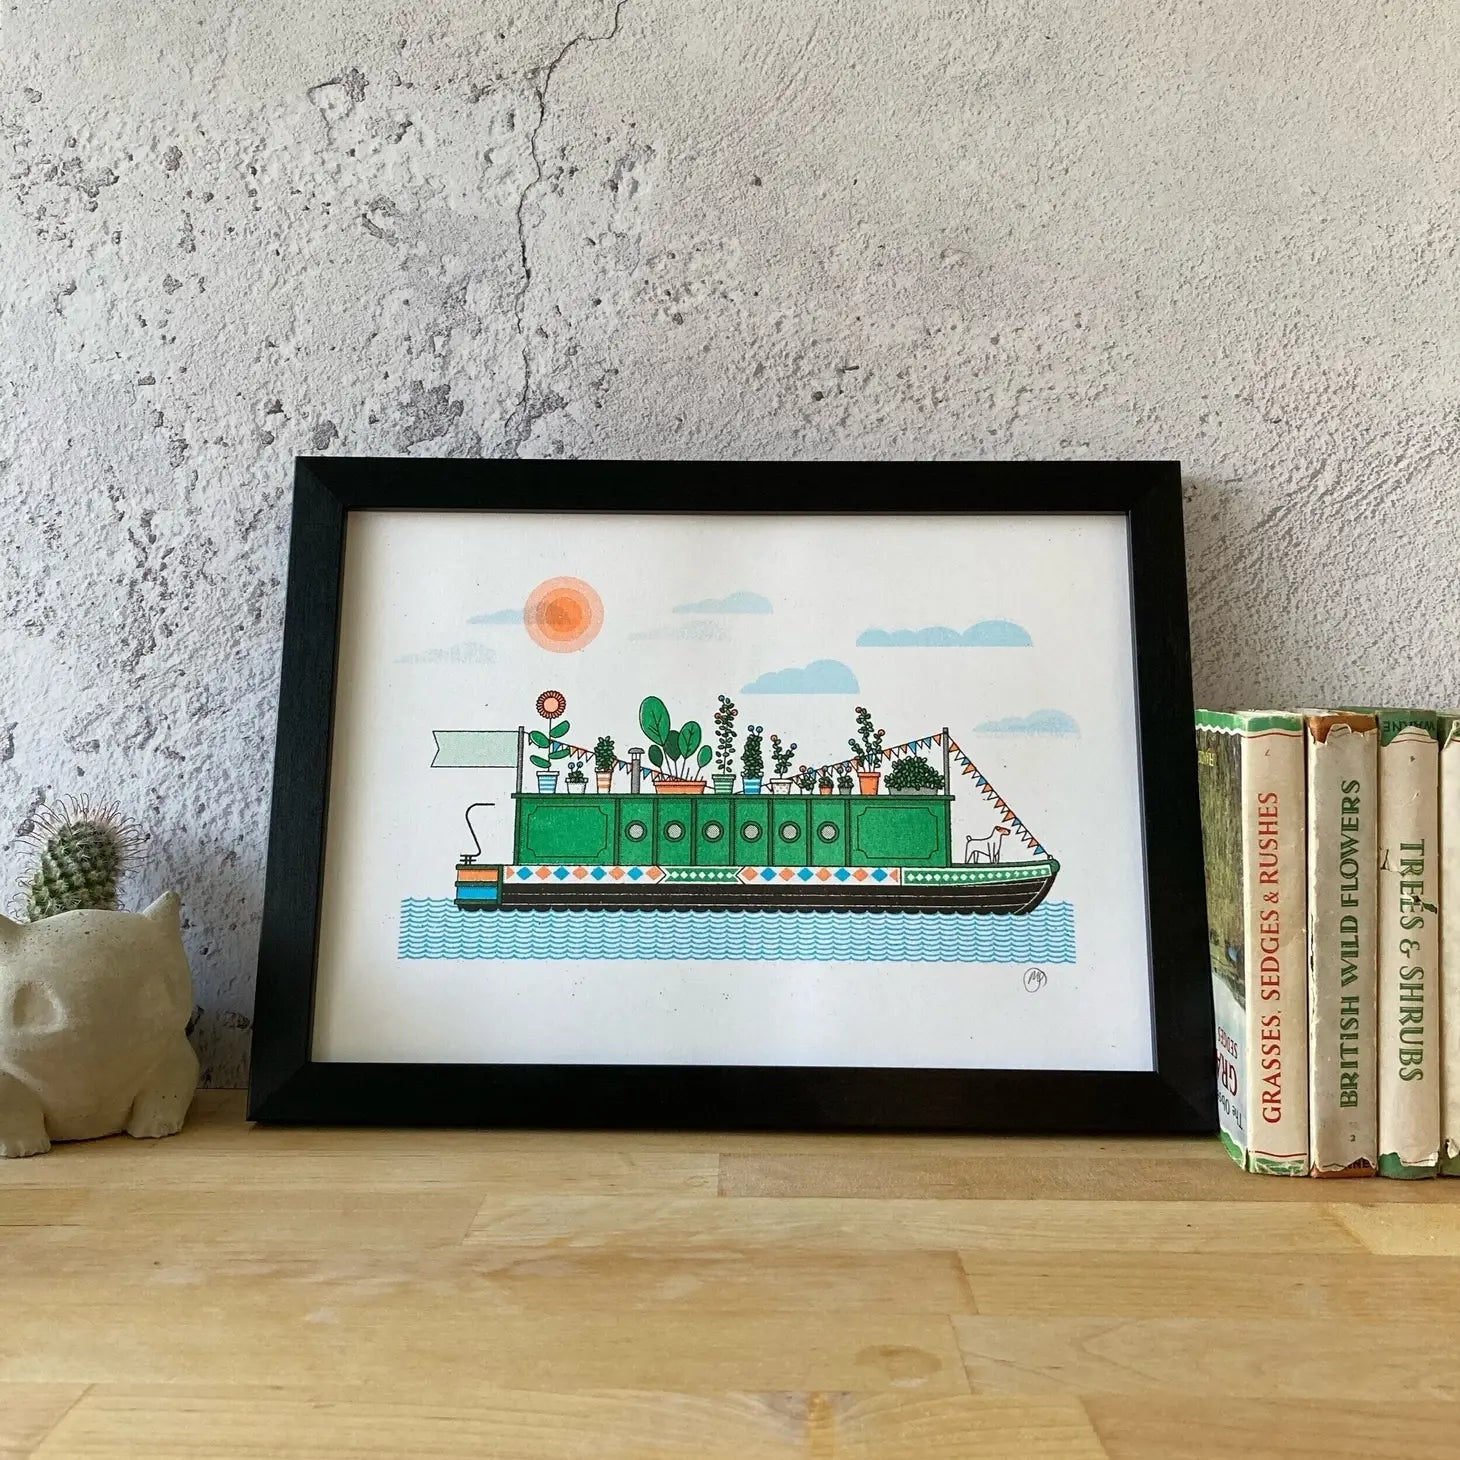 Risograph print of a green narrow boat with a garden rooftop, the sun in the sky.